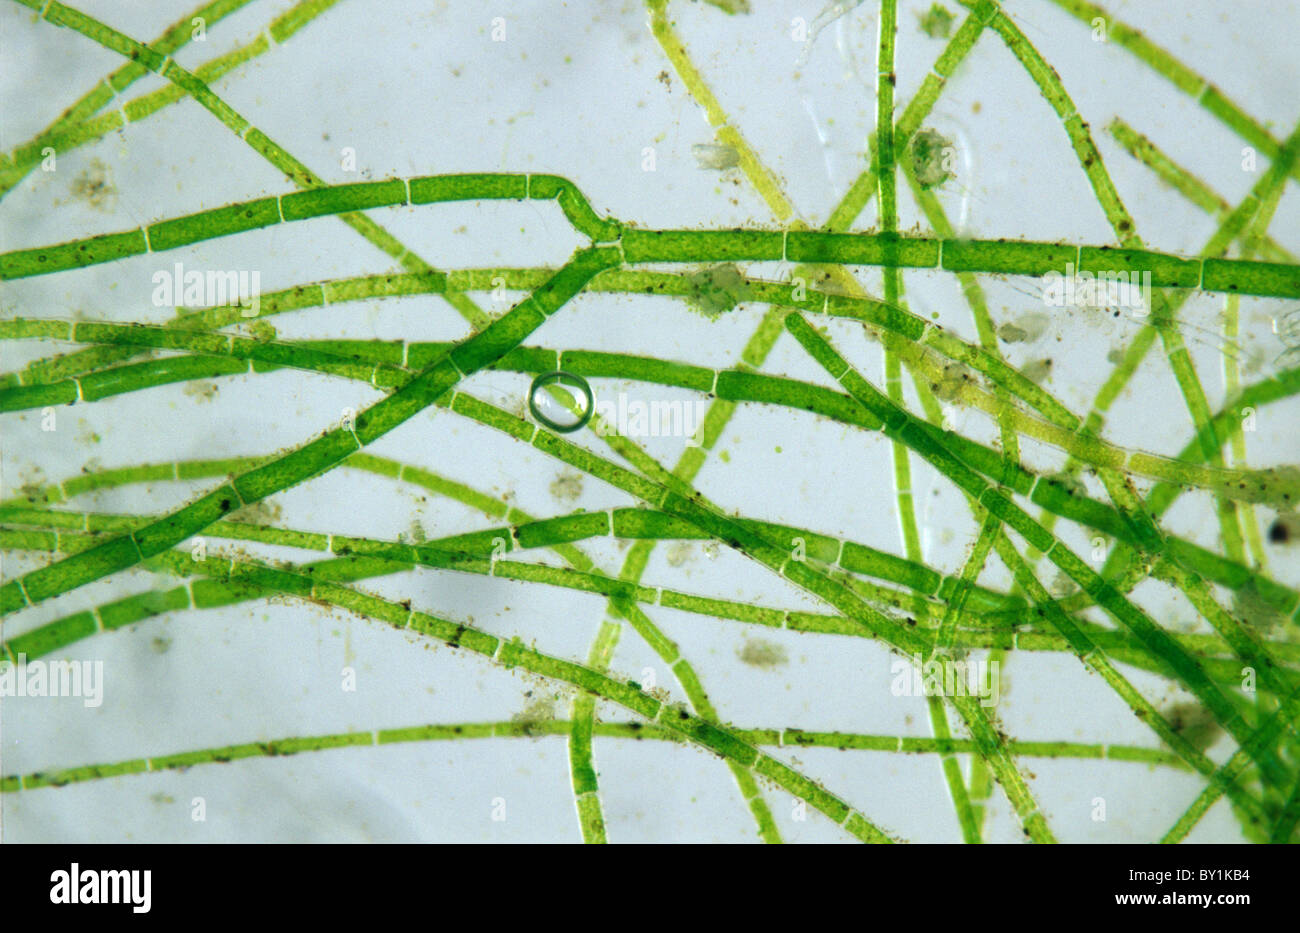 Photomicrograph of blanket weed filaments Stock Photo